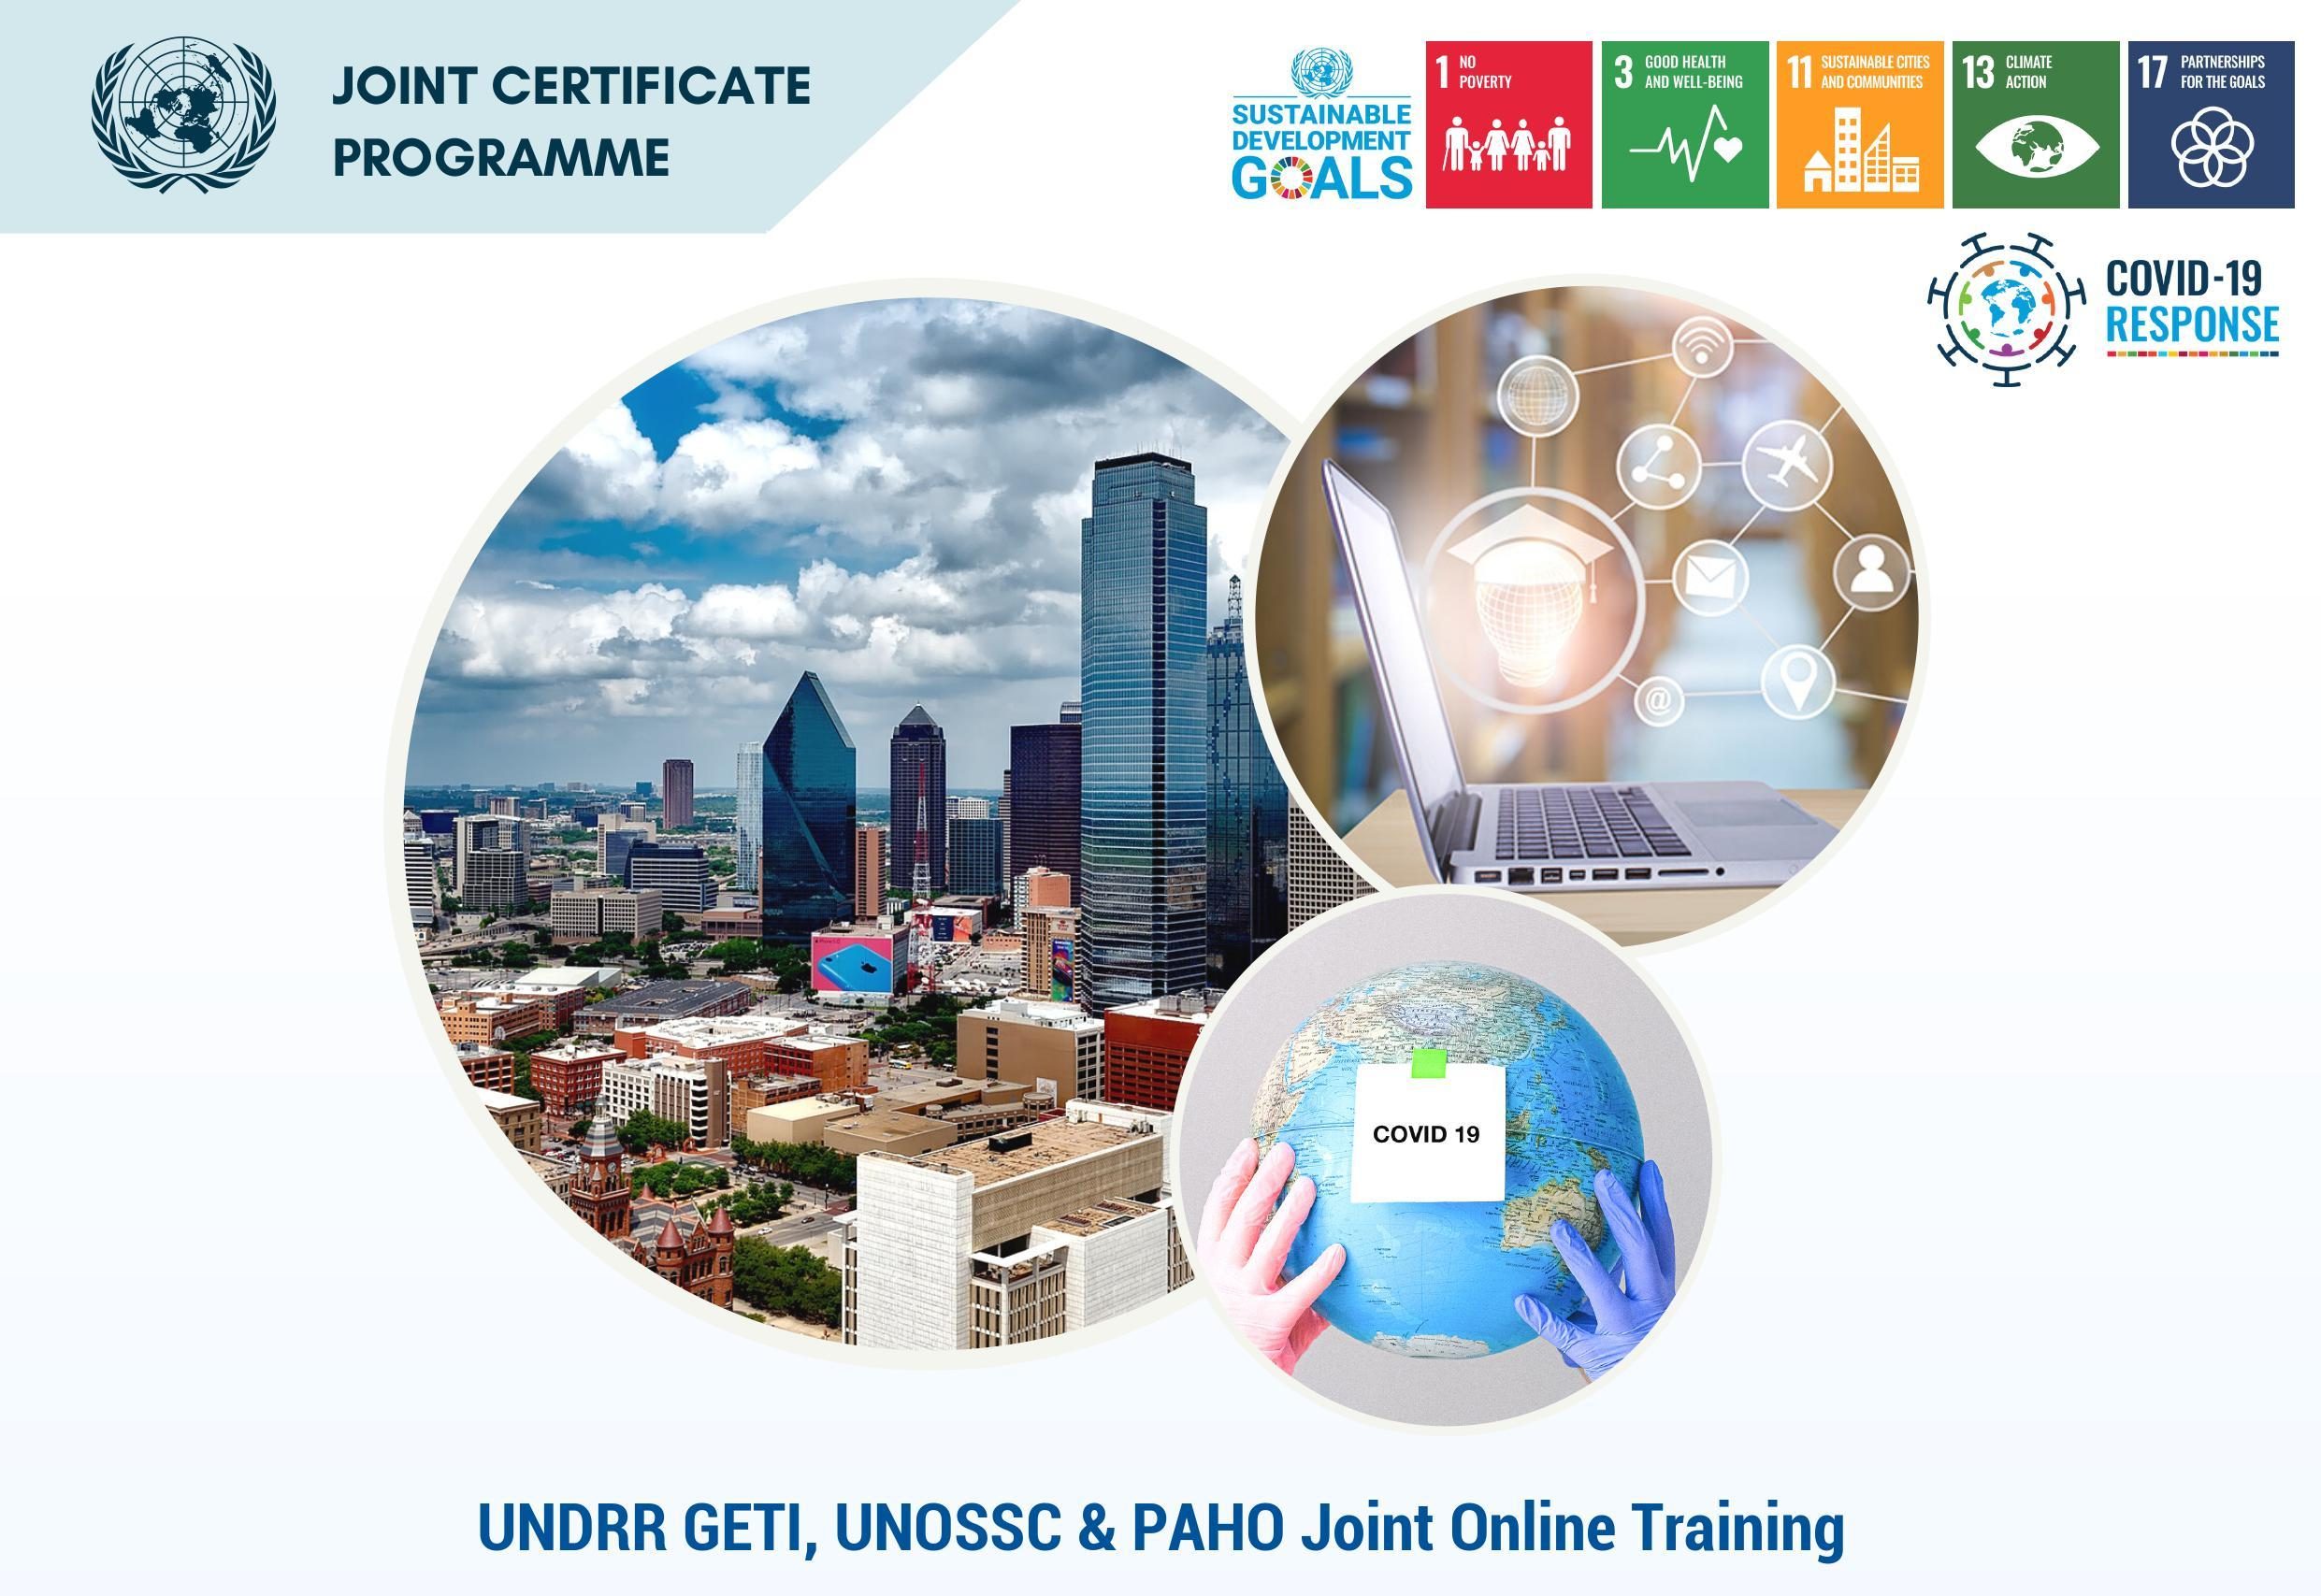 UNDRR GETI, UNOSSC & PAHO Joint Online Training on Making Cities Resilient: 8 September – 6 October